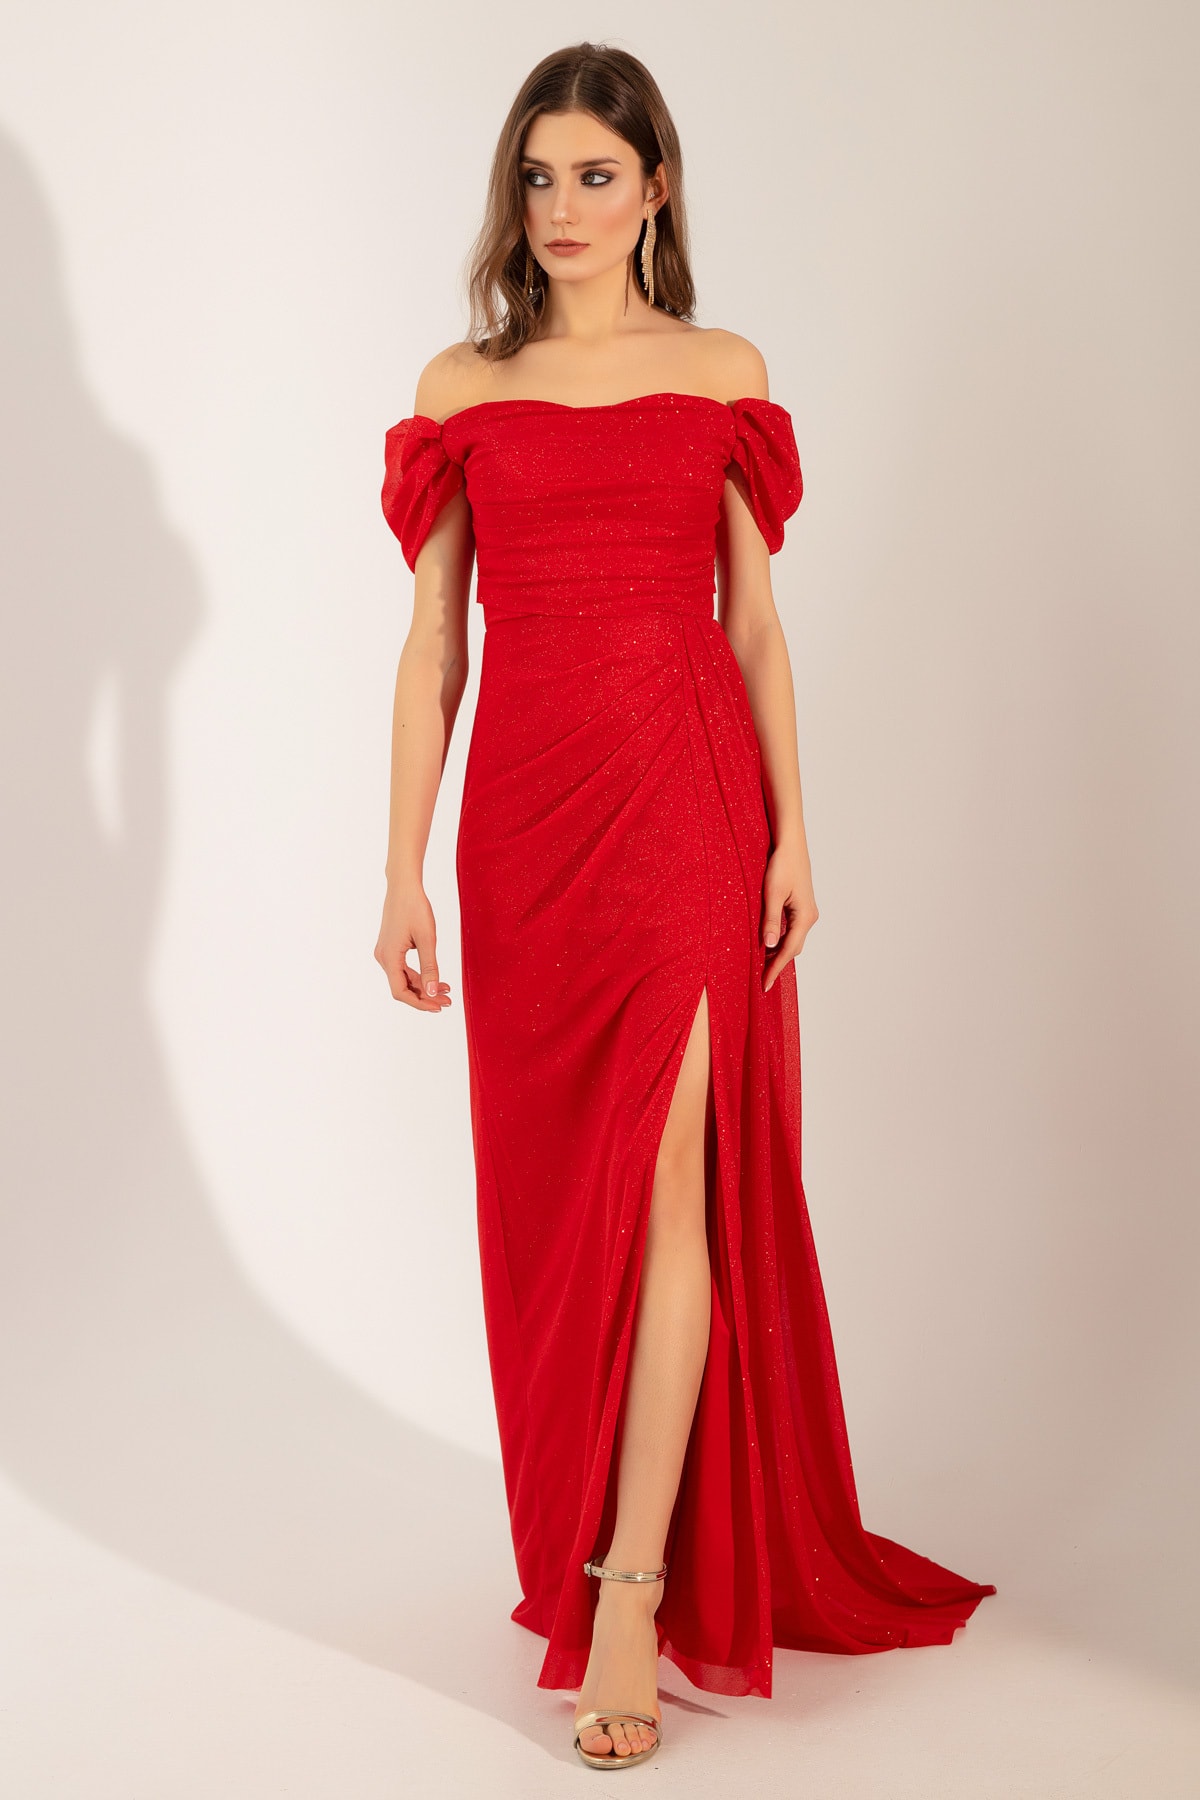 Lafaba Women's Red Boat Collar Draped Long Glittery Evening Dress with a Slit